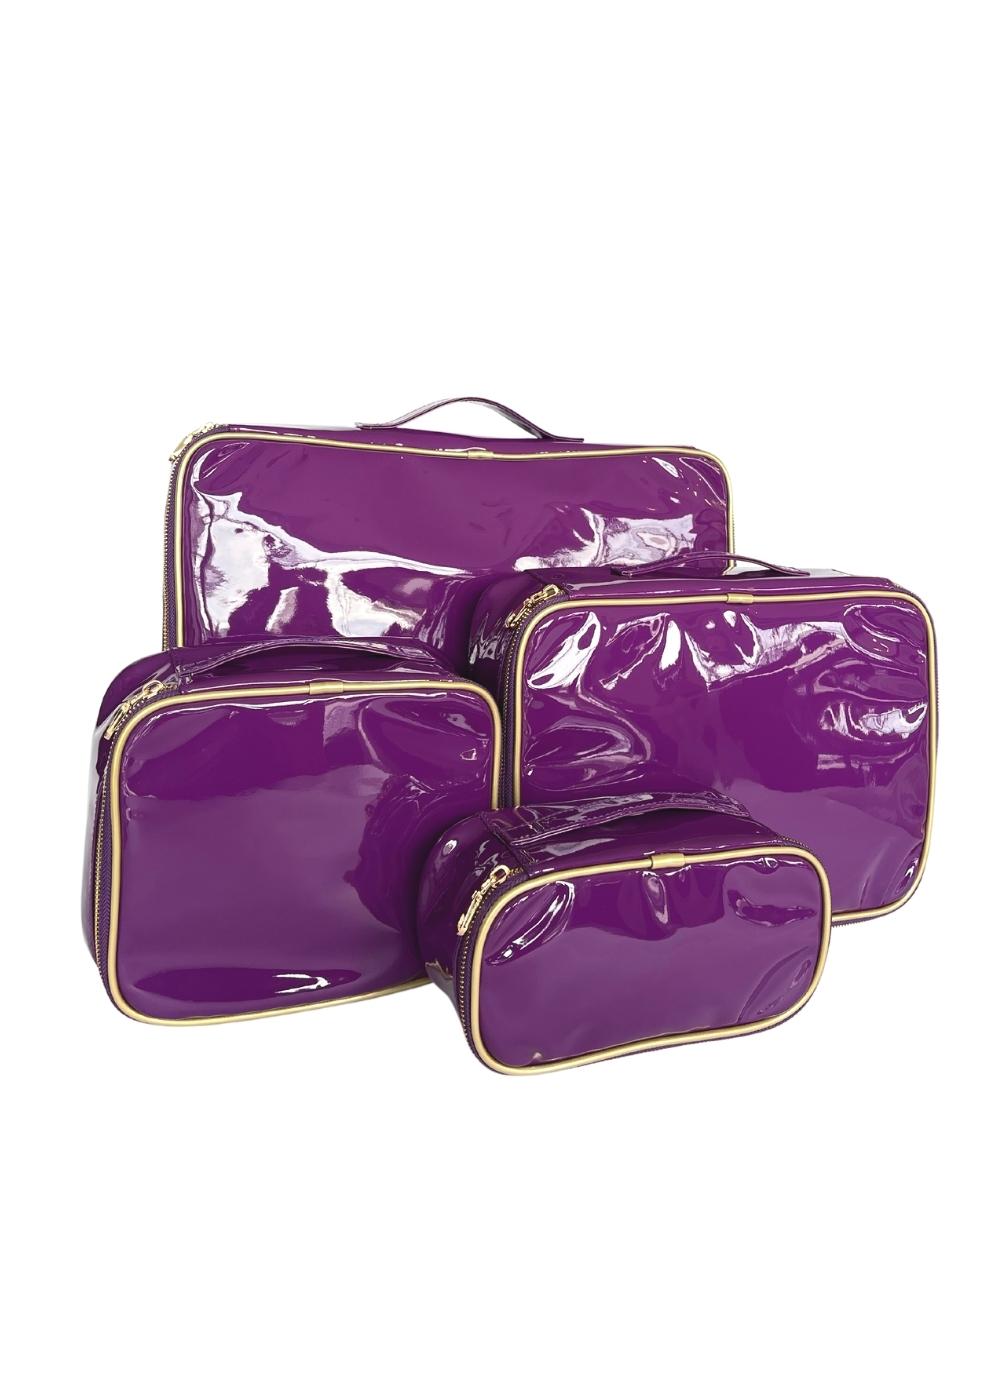 Hand Carry Pops Luggage Set of 4